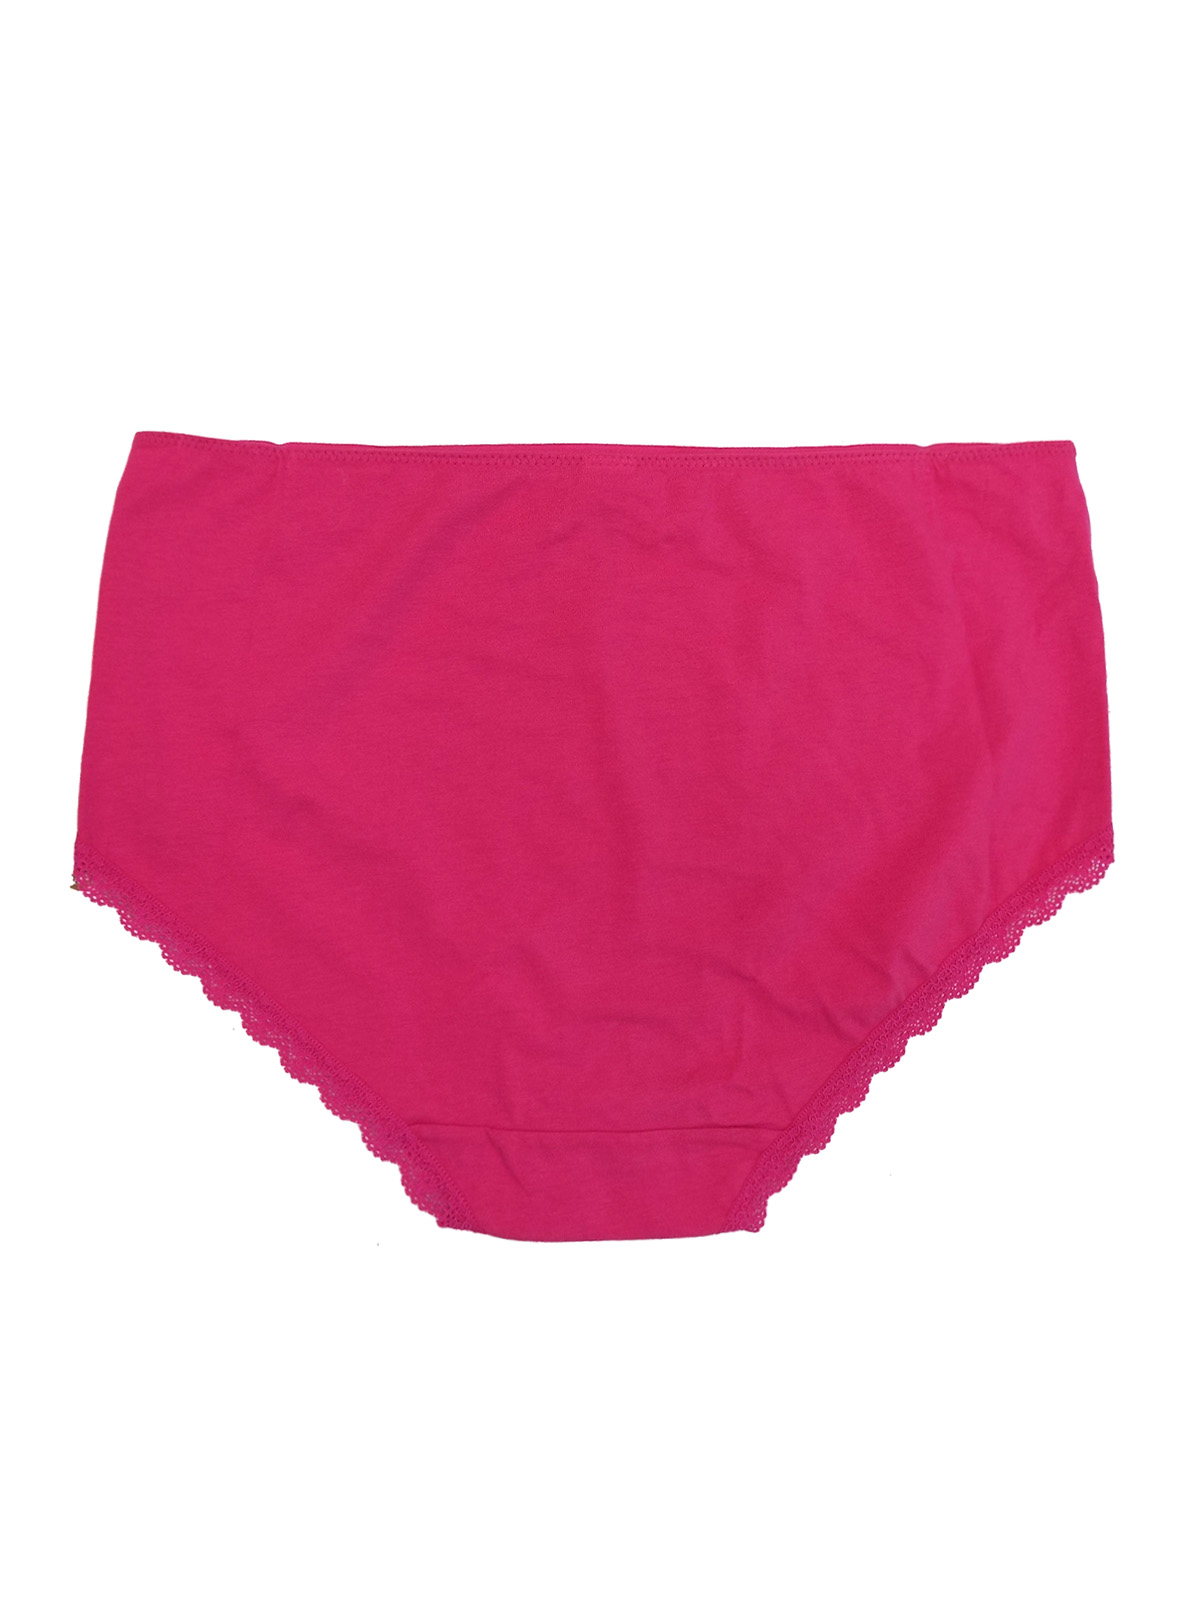 Marks and Spencer - - M&5 PINK Cotton Rich Midi Knickers - Plus Size 12 ...